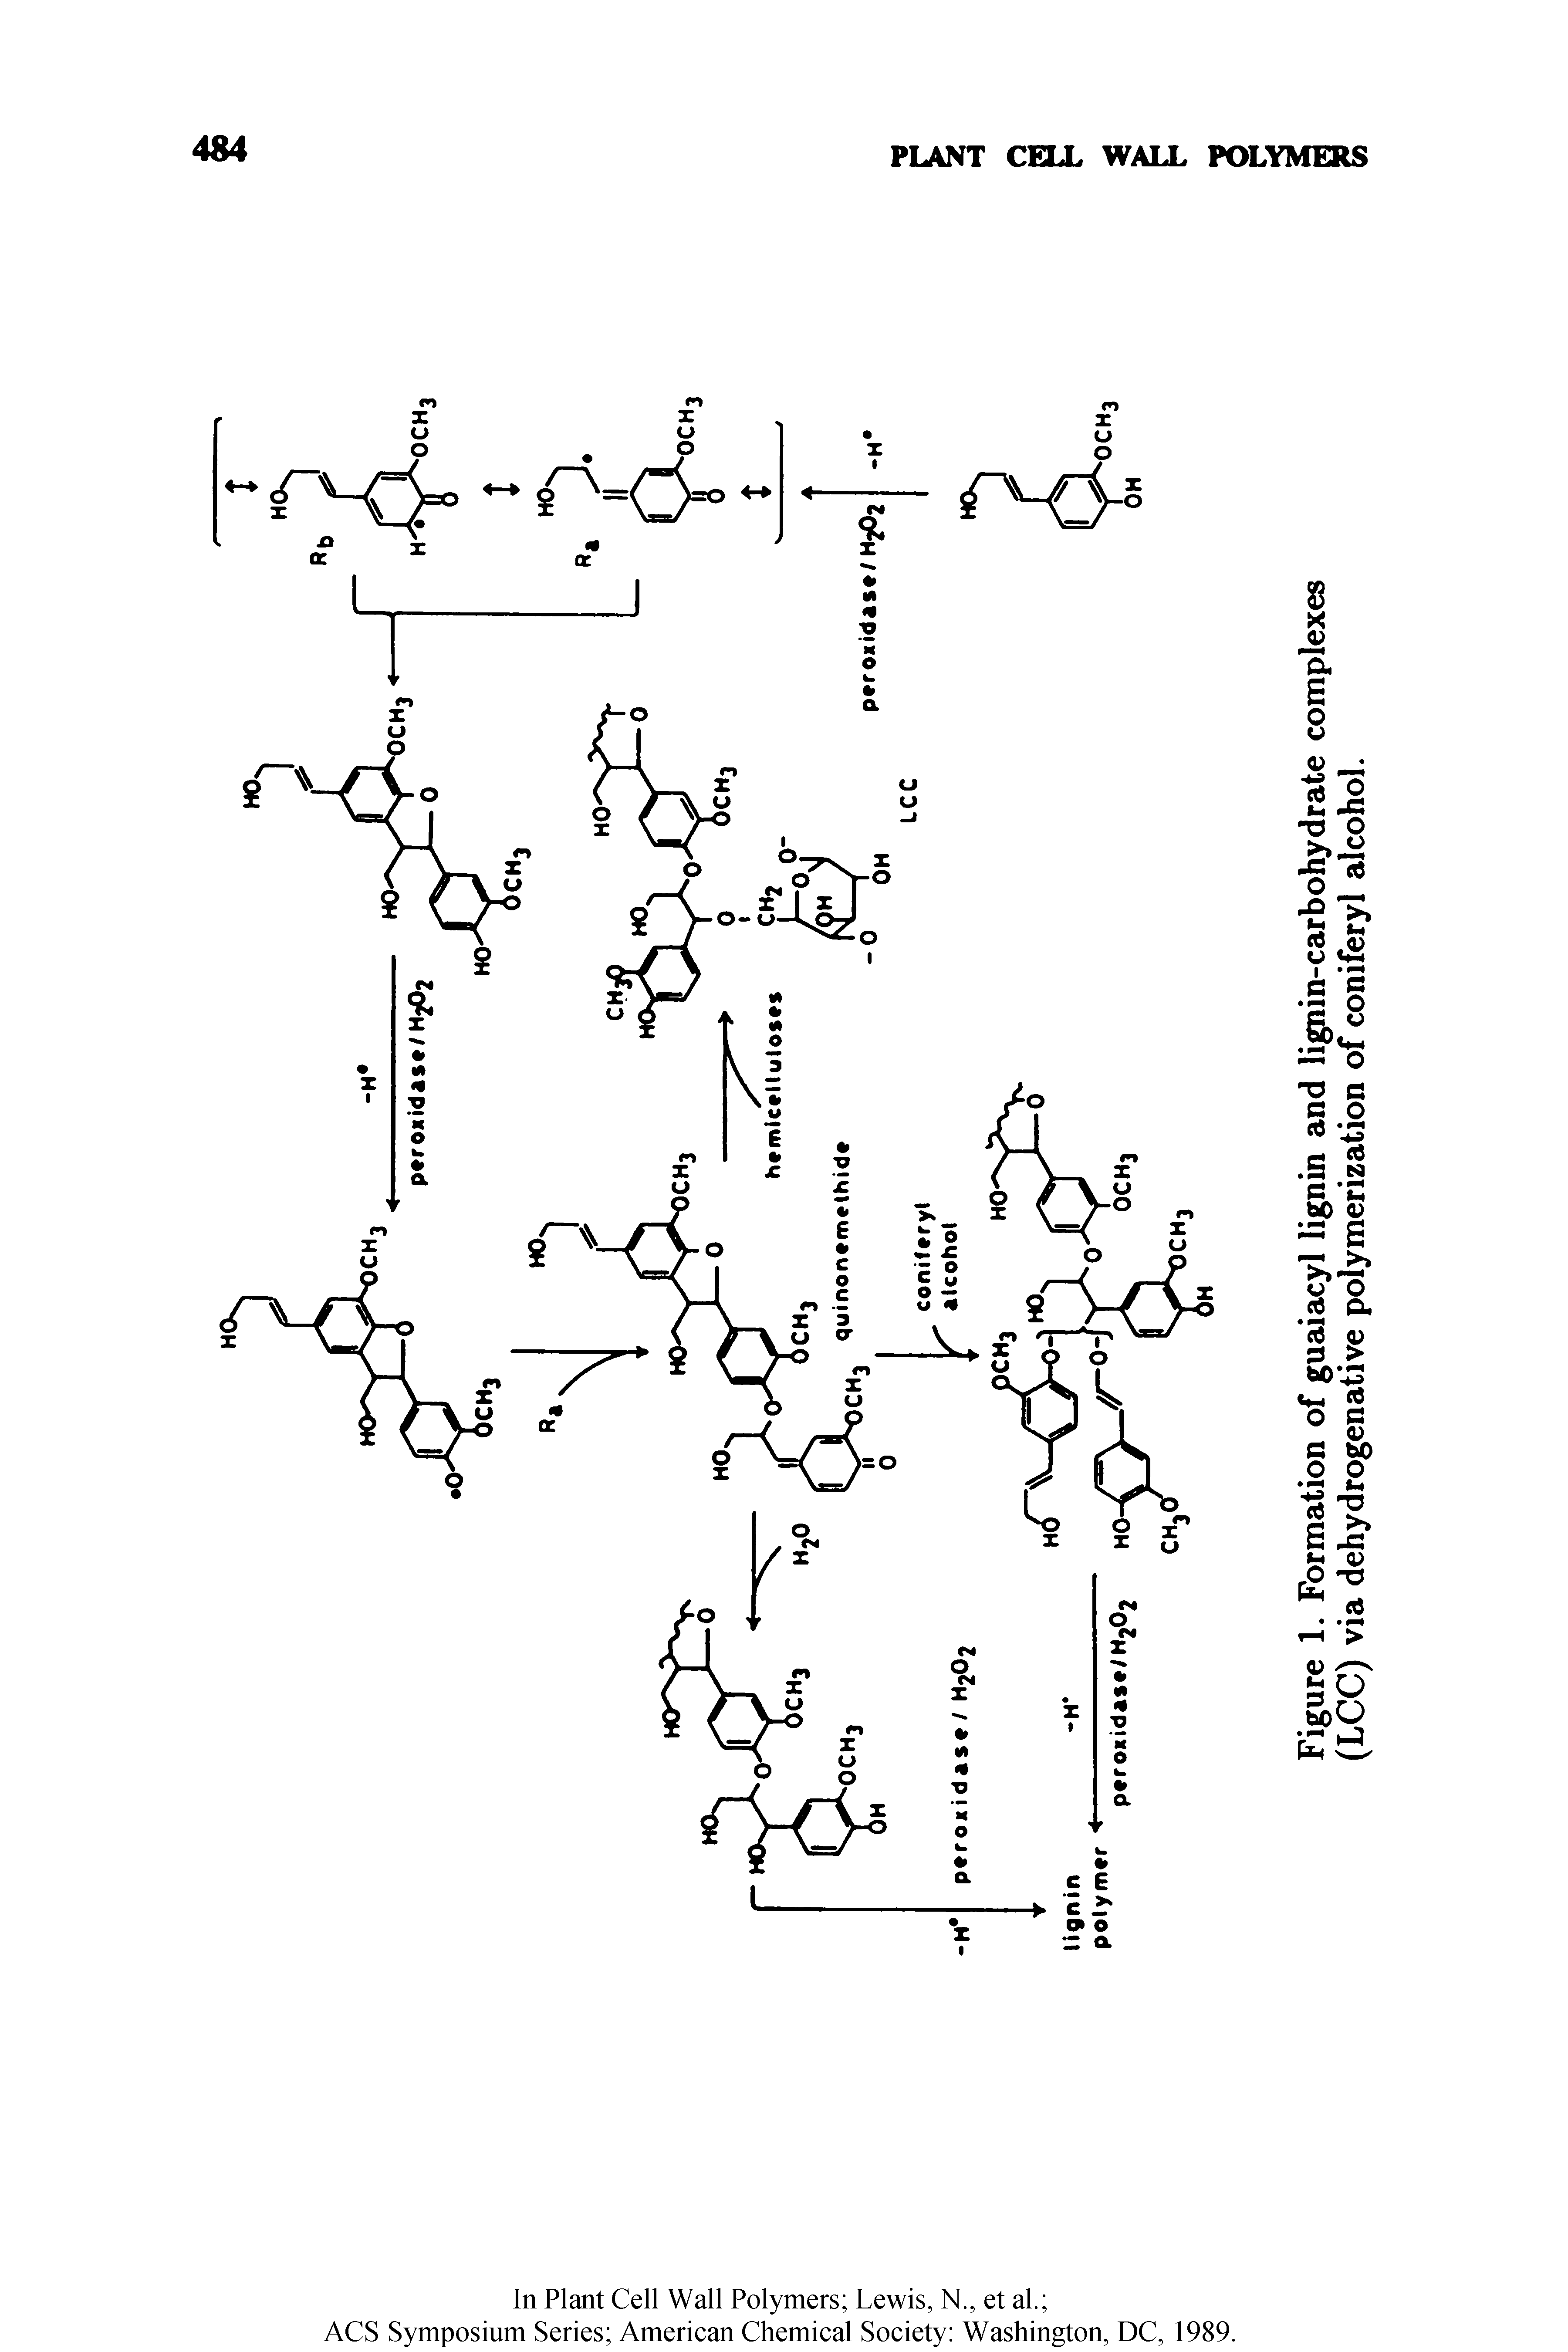 Figure 1. Formation of guaiacyl lignin and lignin-carbohydrate complexes (LCC) via dehydrogenative polymerization of coniferyl alcohol.